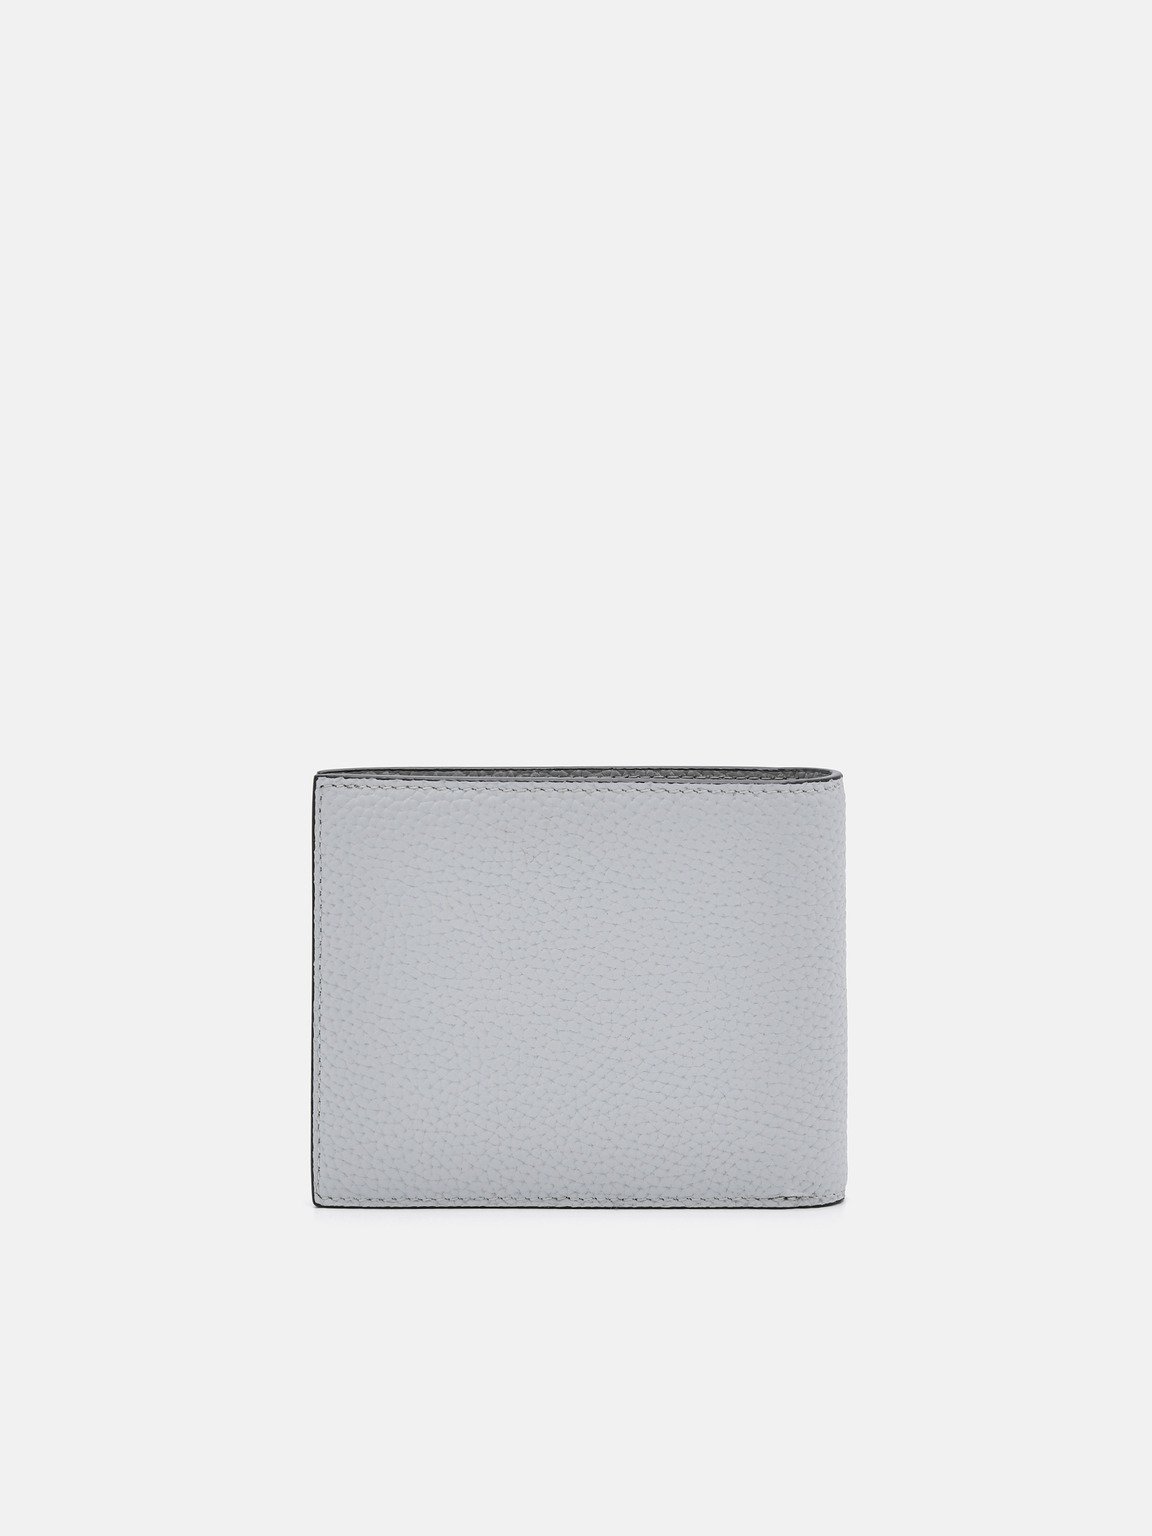 Embossed Leather Bi-Fold Wallet with Insert, Light Grey